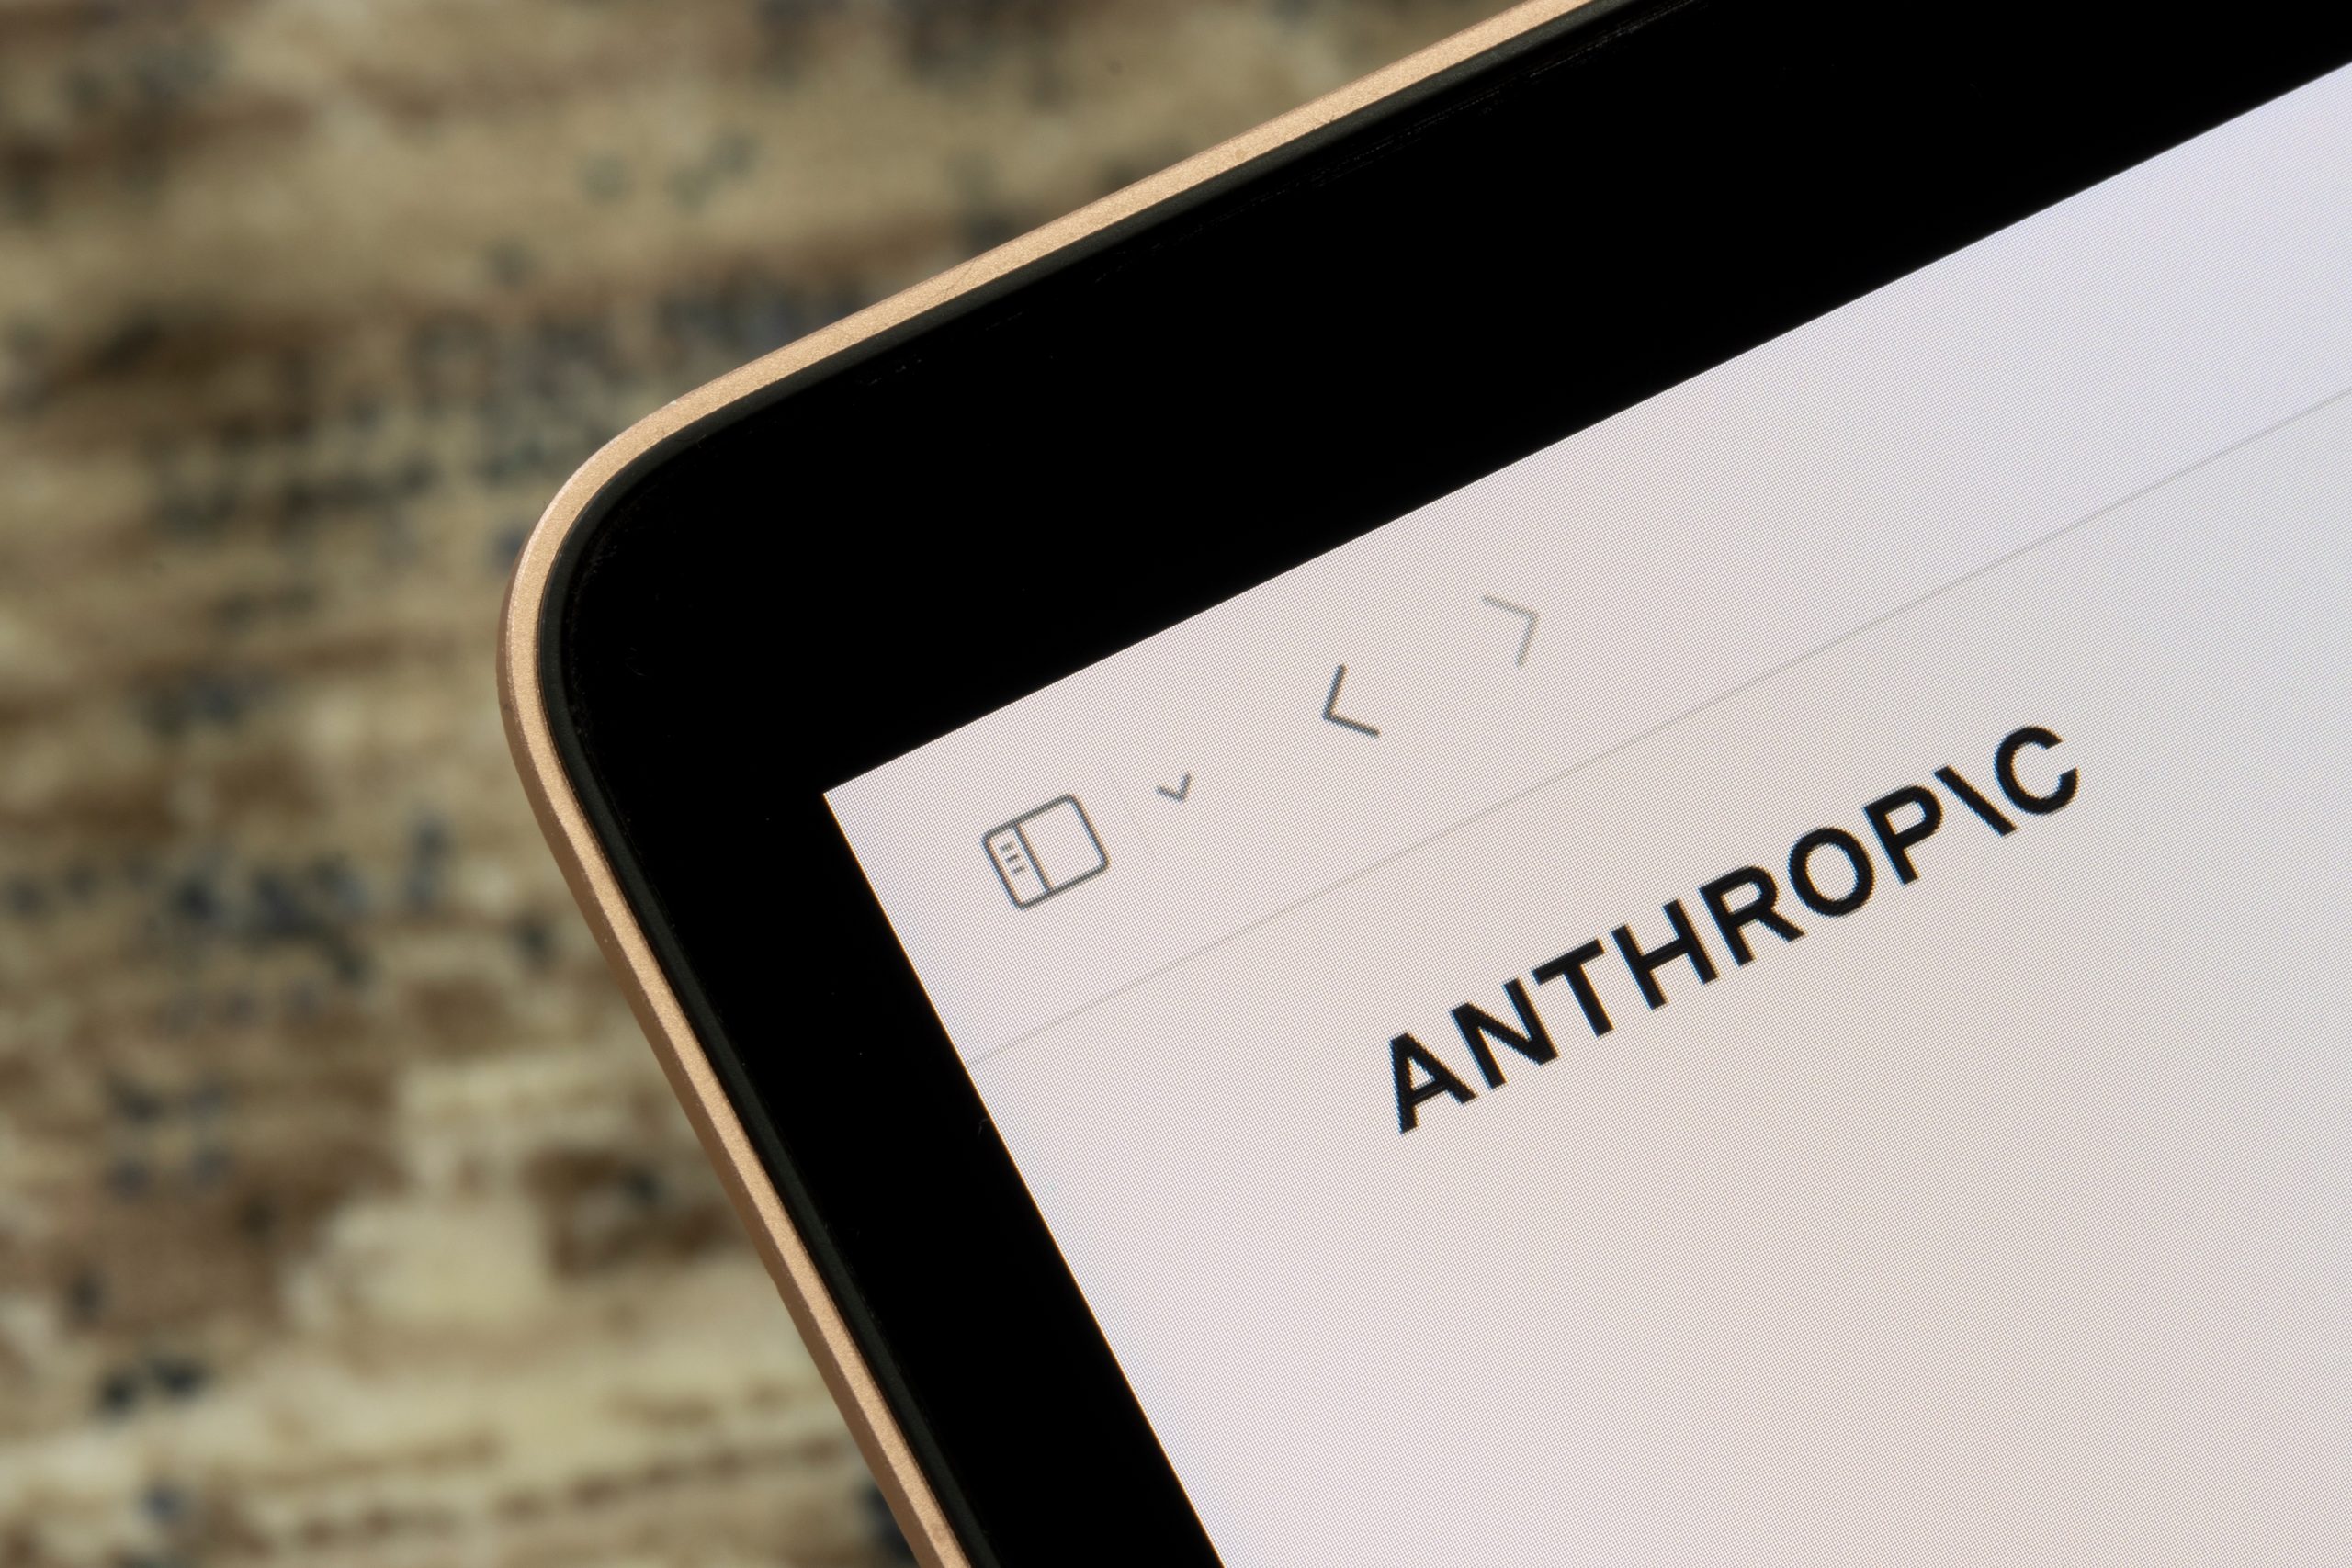 Anthropic Launches Claude 2 With 100k Context Windows, File Upload Capability